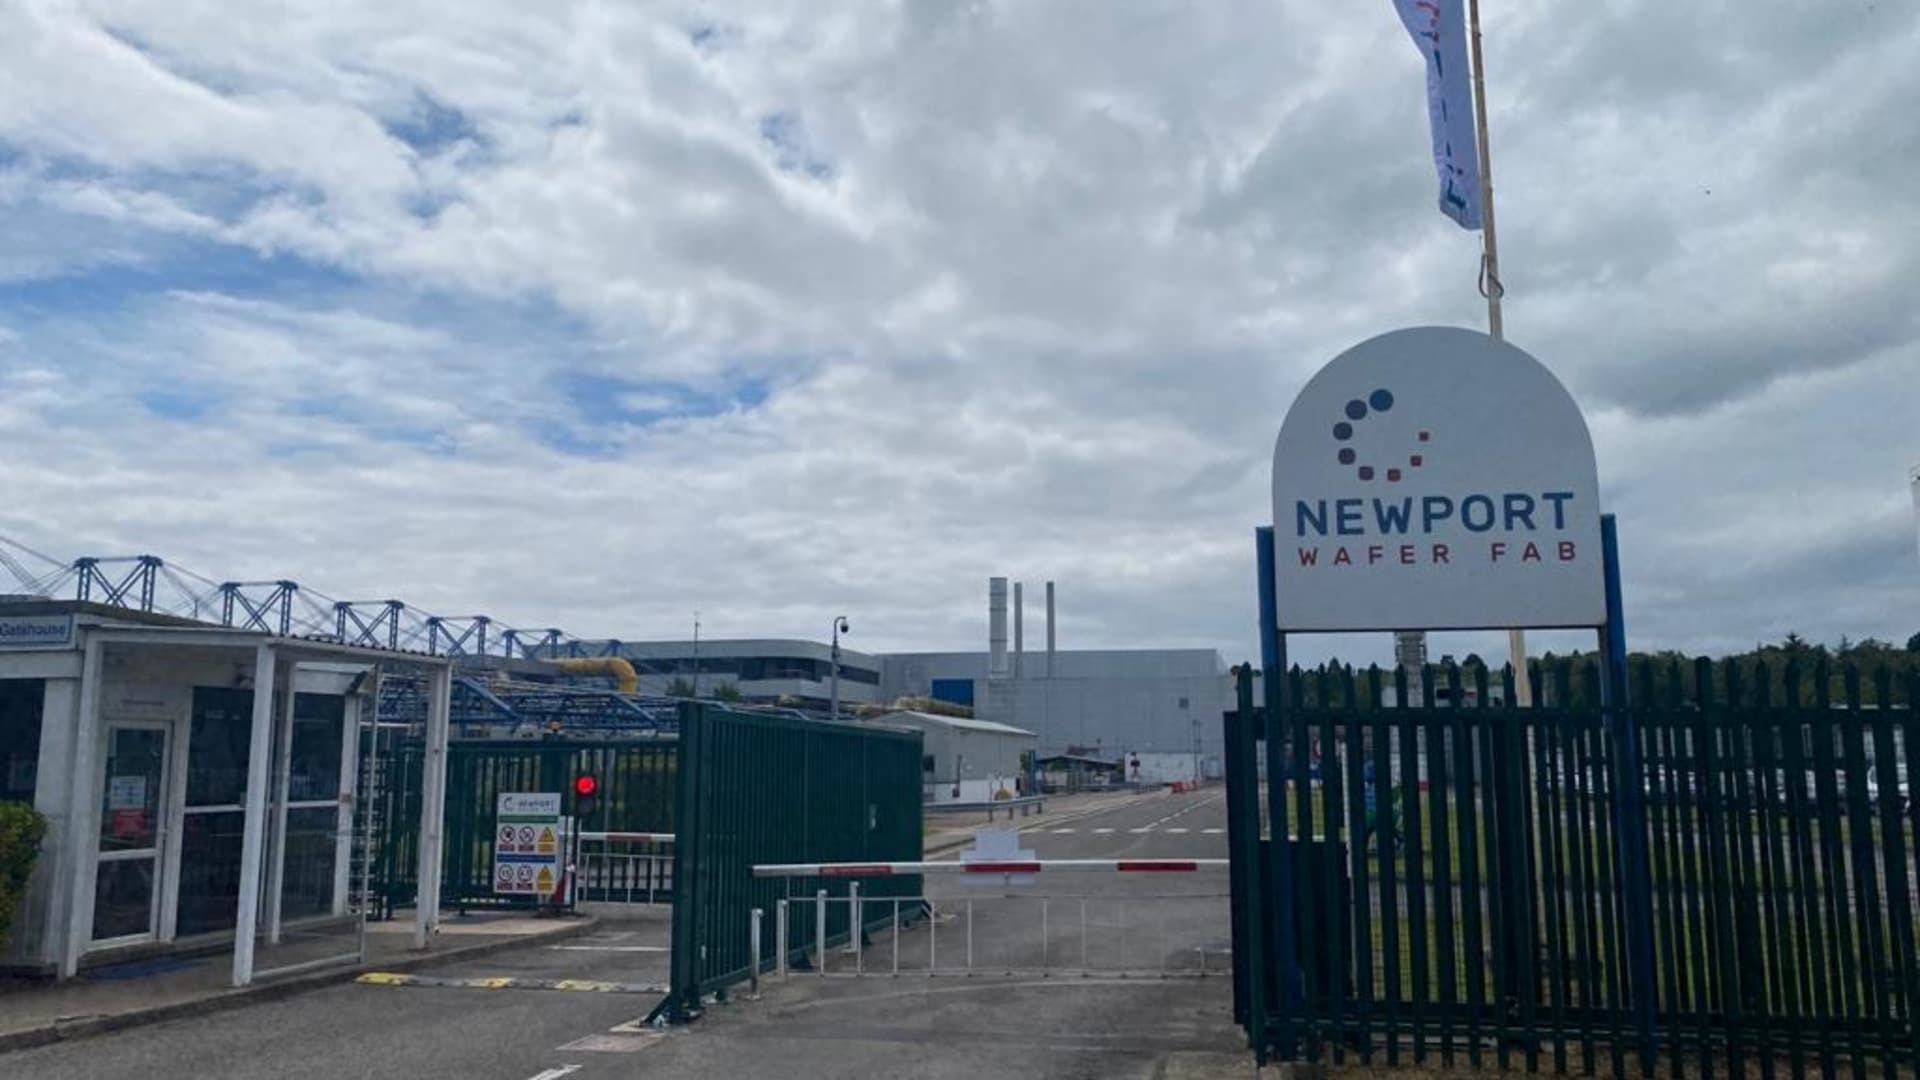 The entrance to Newport Wafer Fab's manufacturing facility in Newport, Wales.